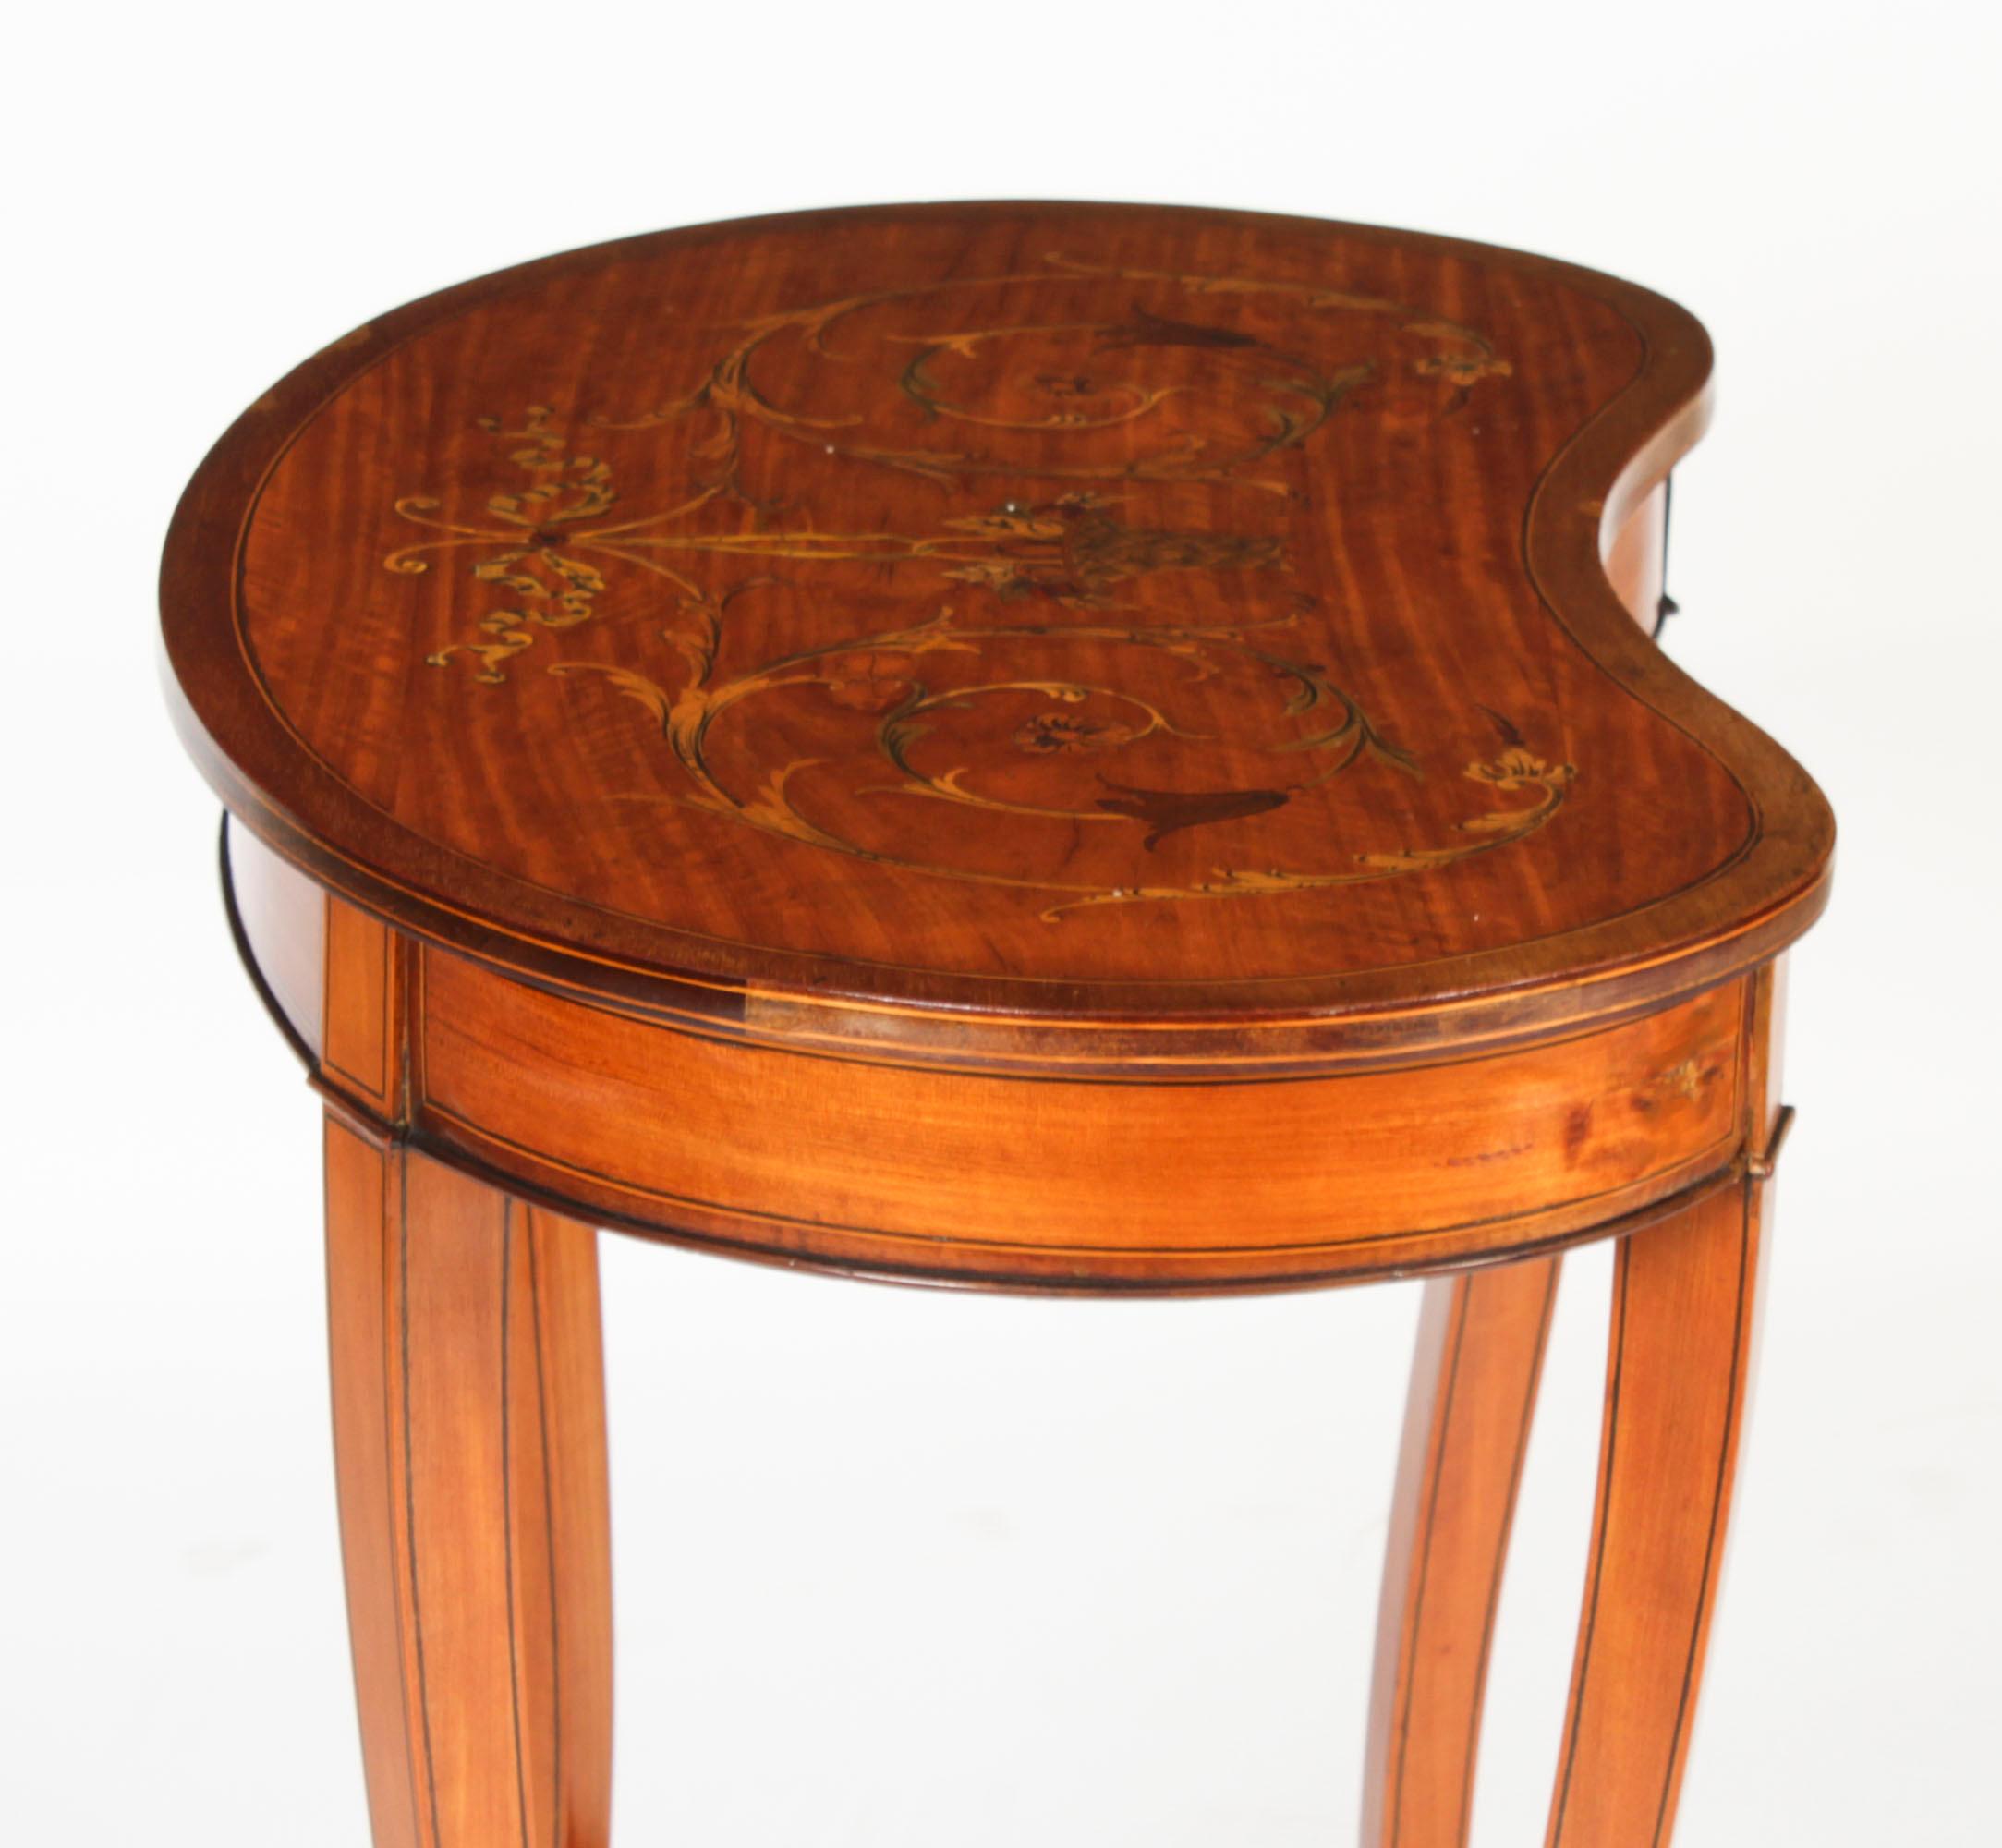 Antique English Marquetry Kidney Shaped Occasionally Tables 19th Century For Sale 9